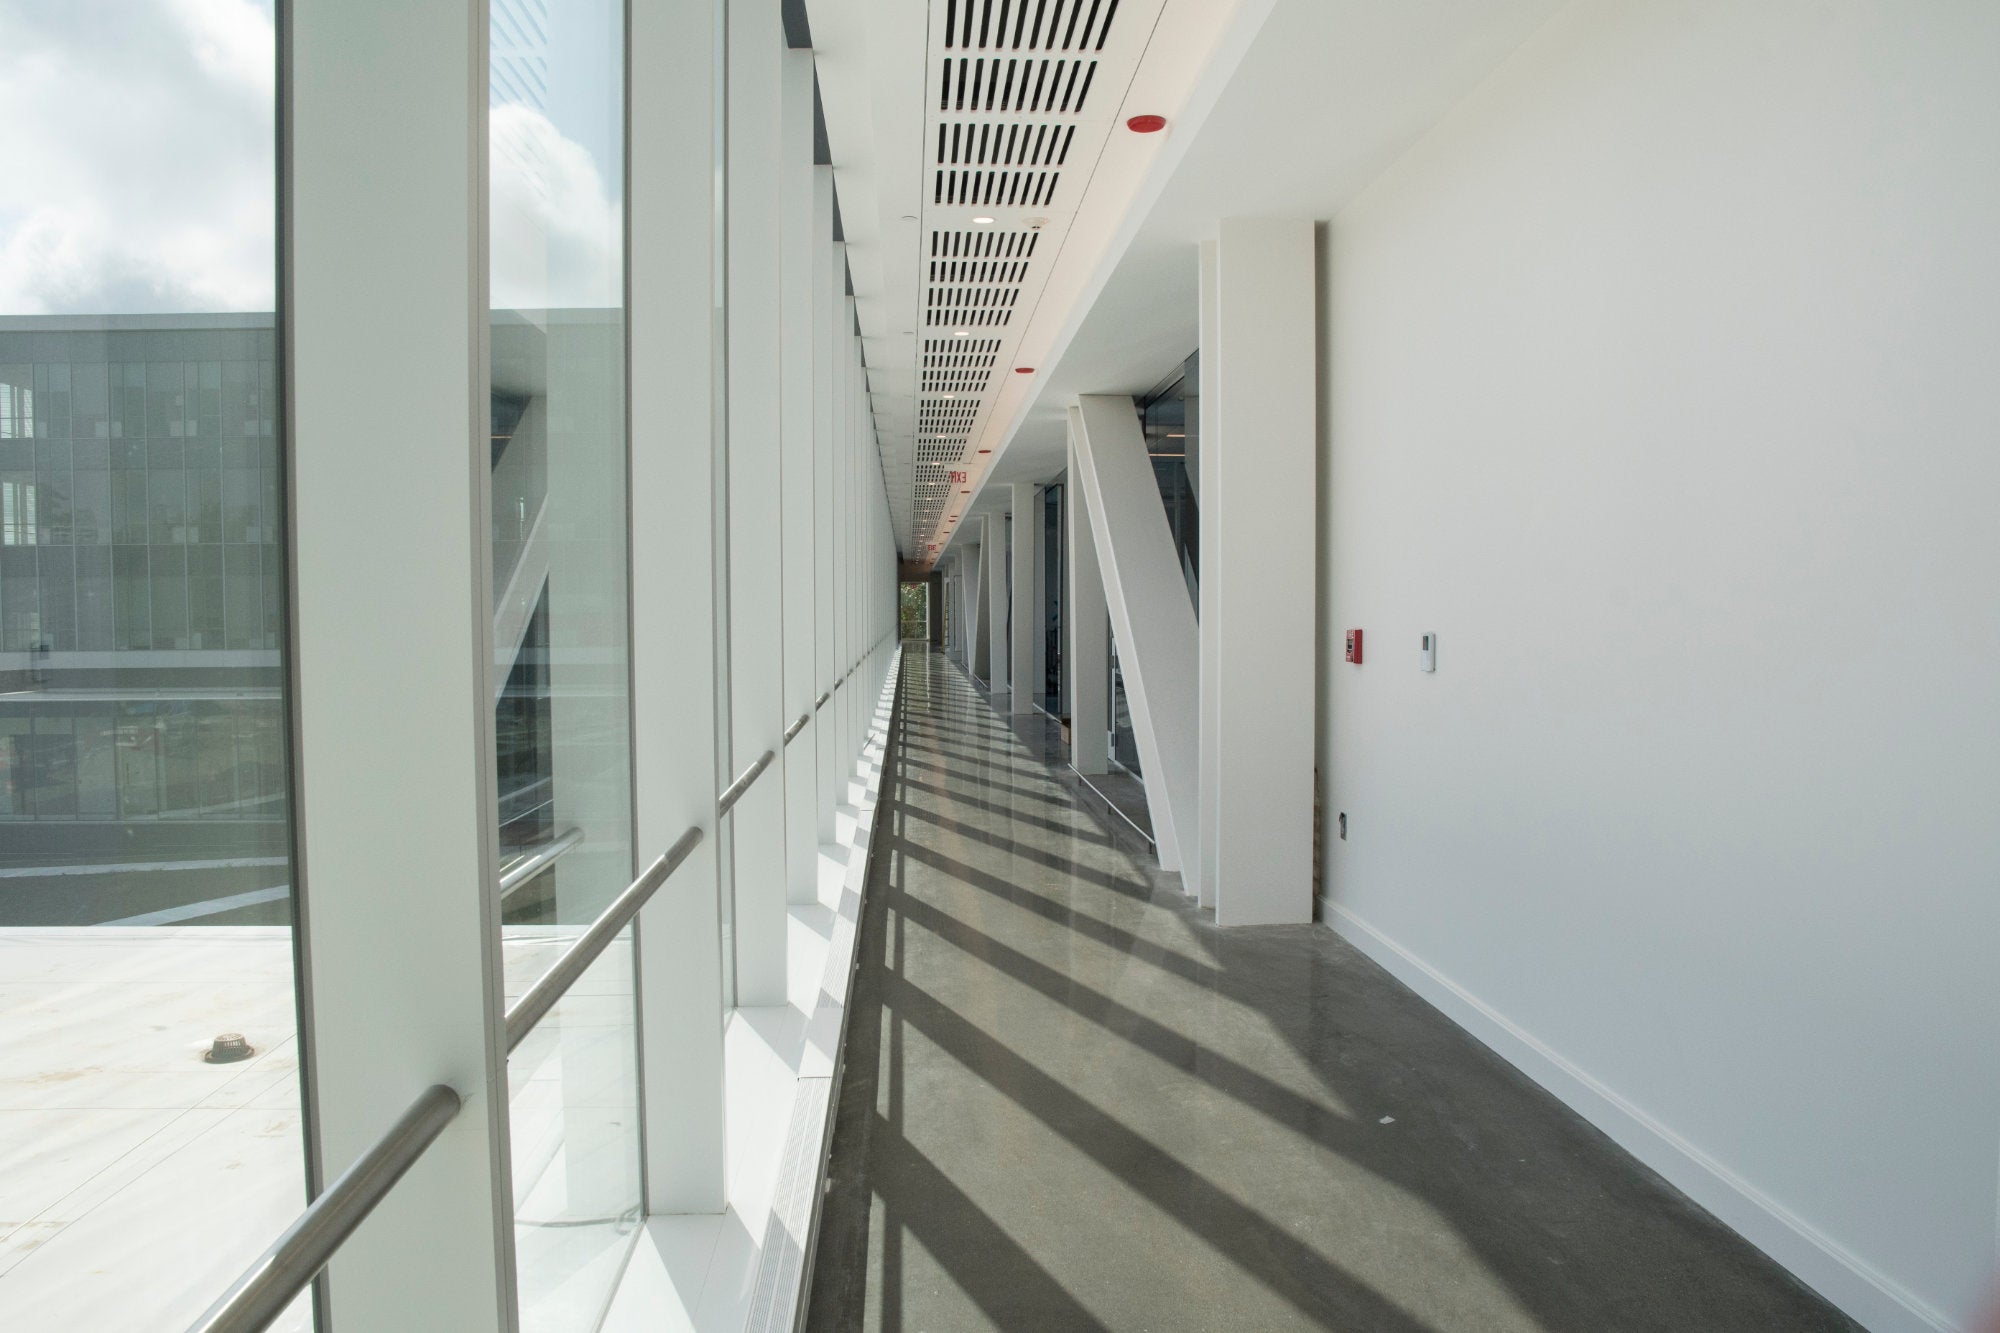 A bright open corridor on the fourth floor shows the building's metal truss support system.